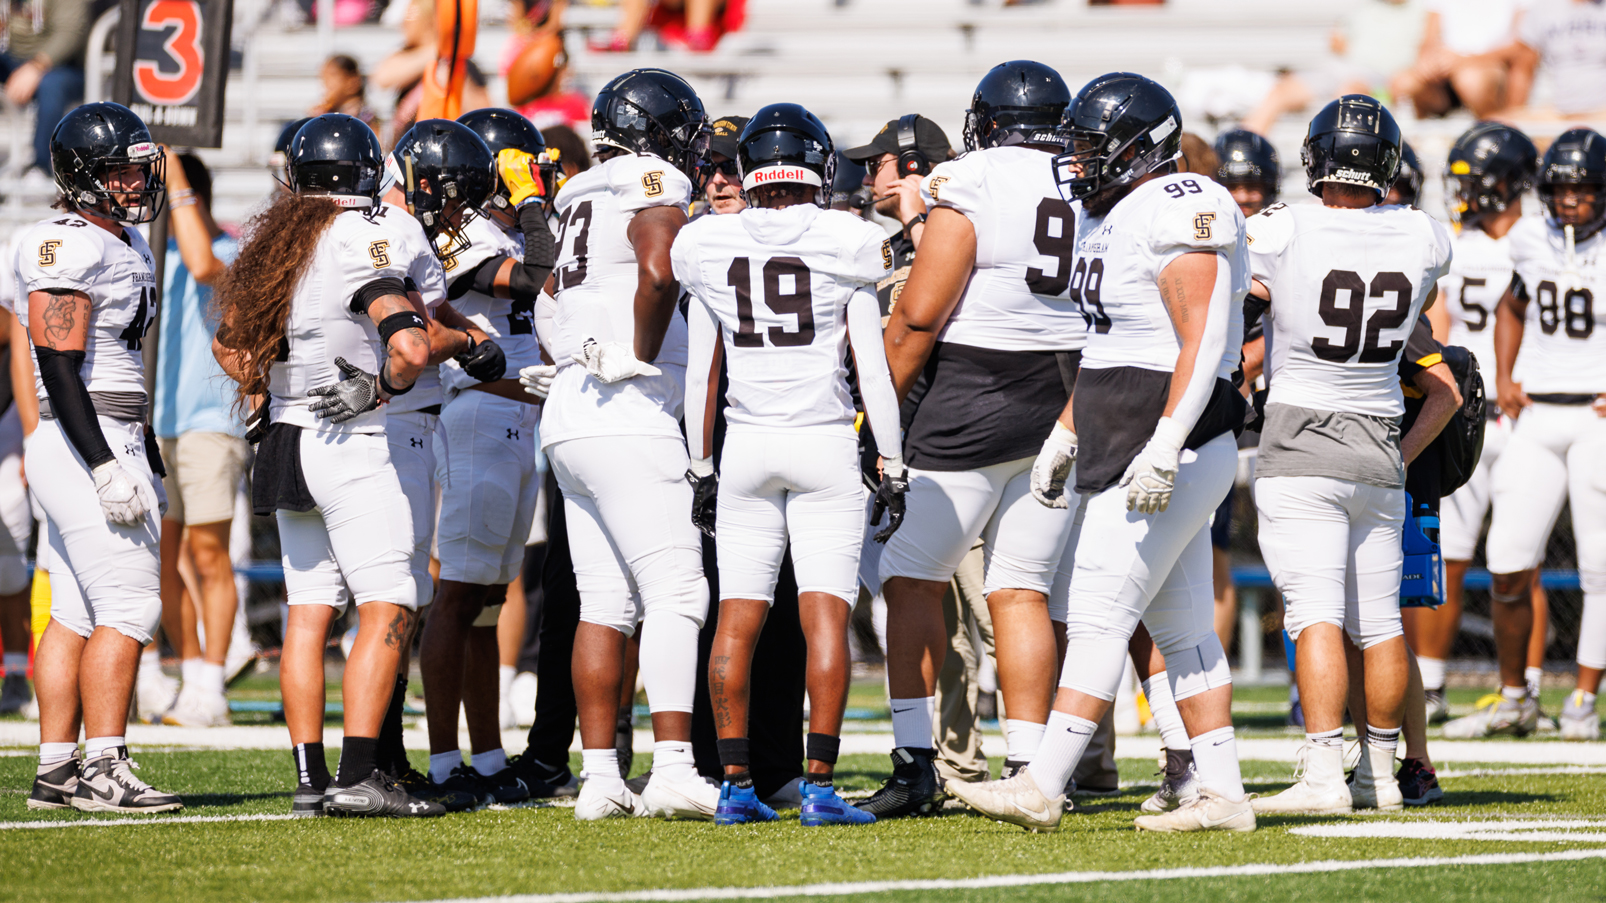 Football Falls 35-14 at Western Connecticut